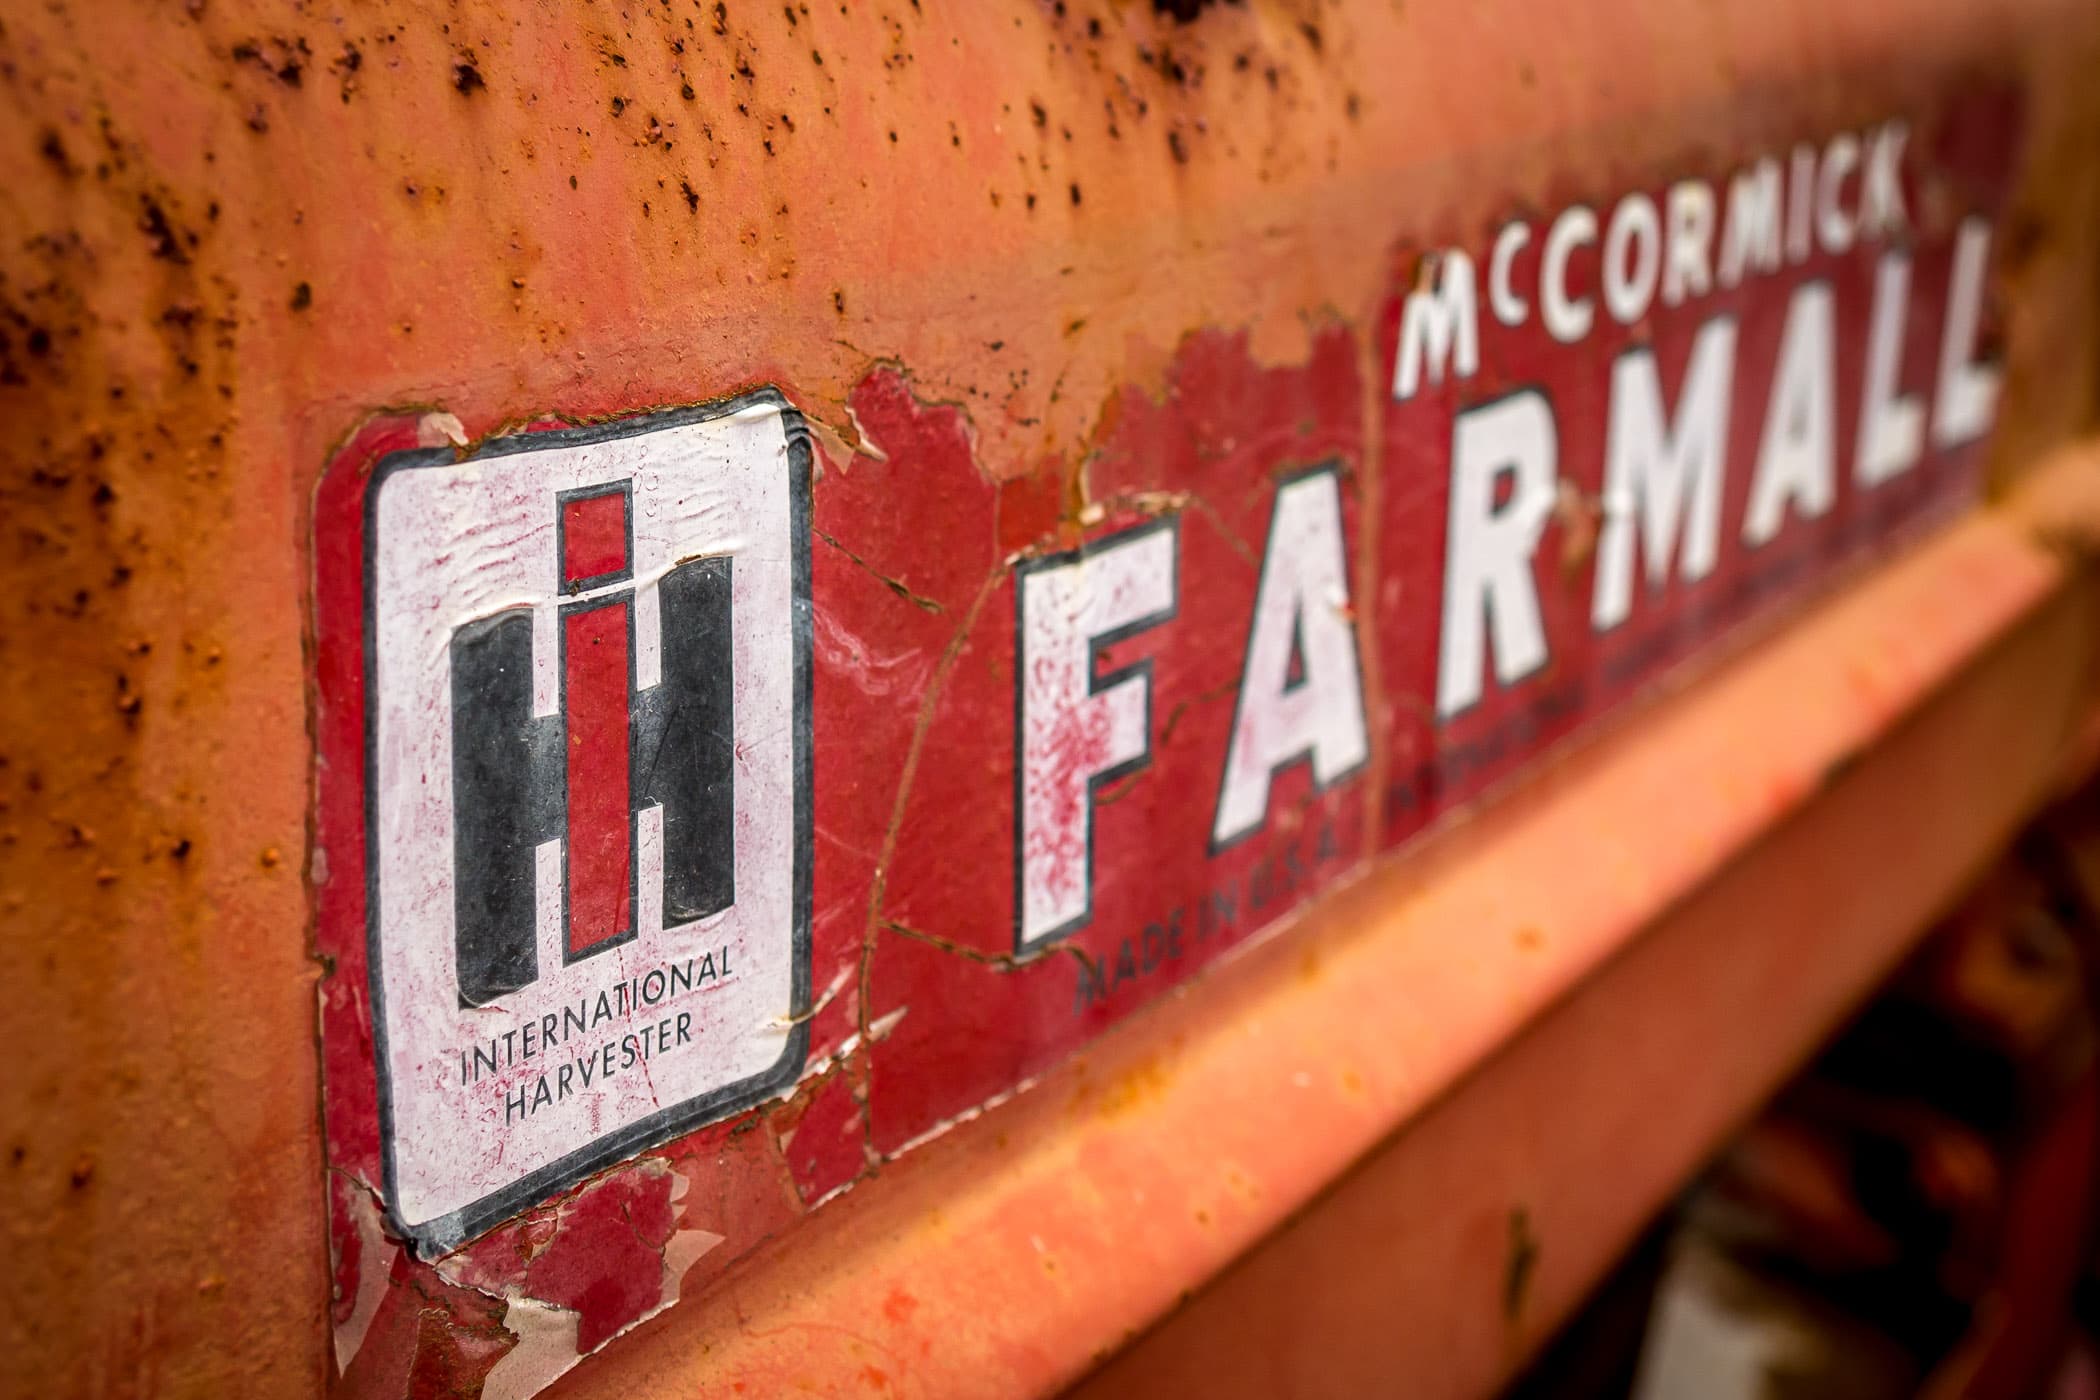 Detail of the cracked and peeling label of an International Harvester McCormick Farmall tractor, spotted at Moore Farms in Bullard, Texas.